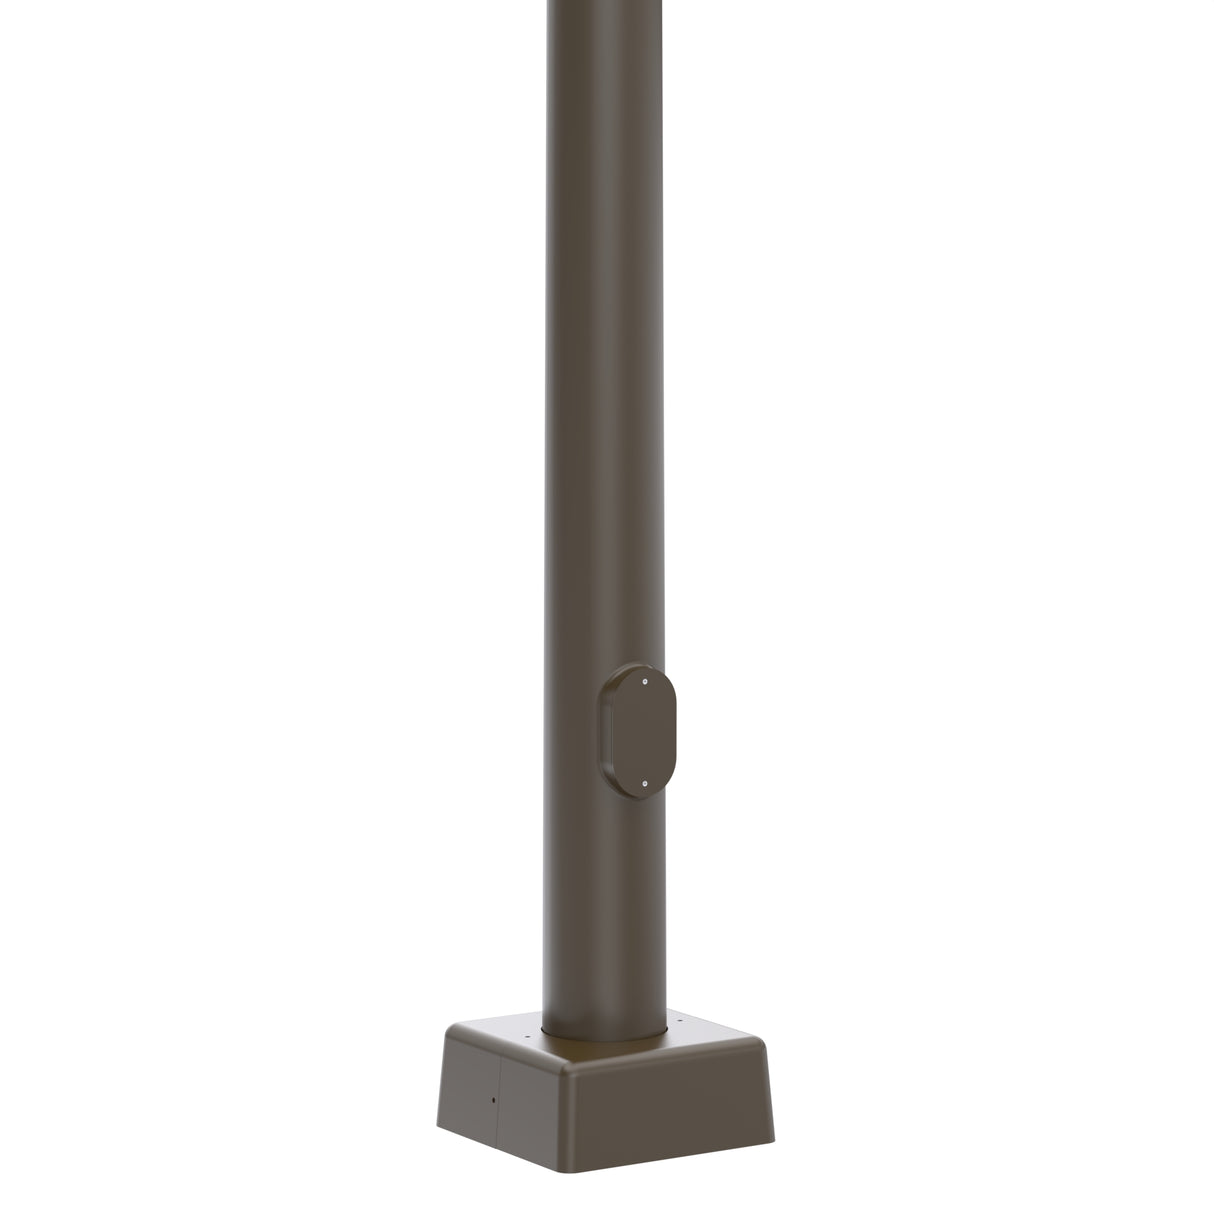 20' Tall x 6.5" Base OD x 3.7" Top OD x 11ga Thick, Round Tapered Steel, Anchor Base Light Pole